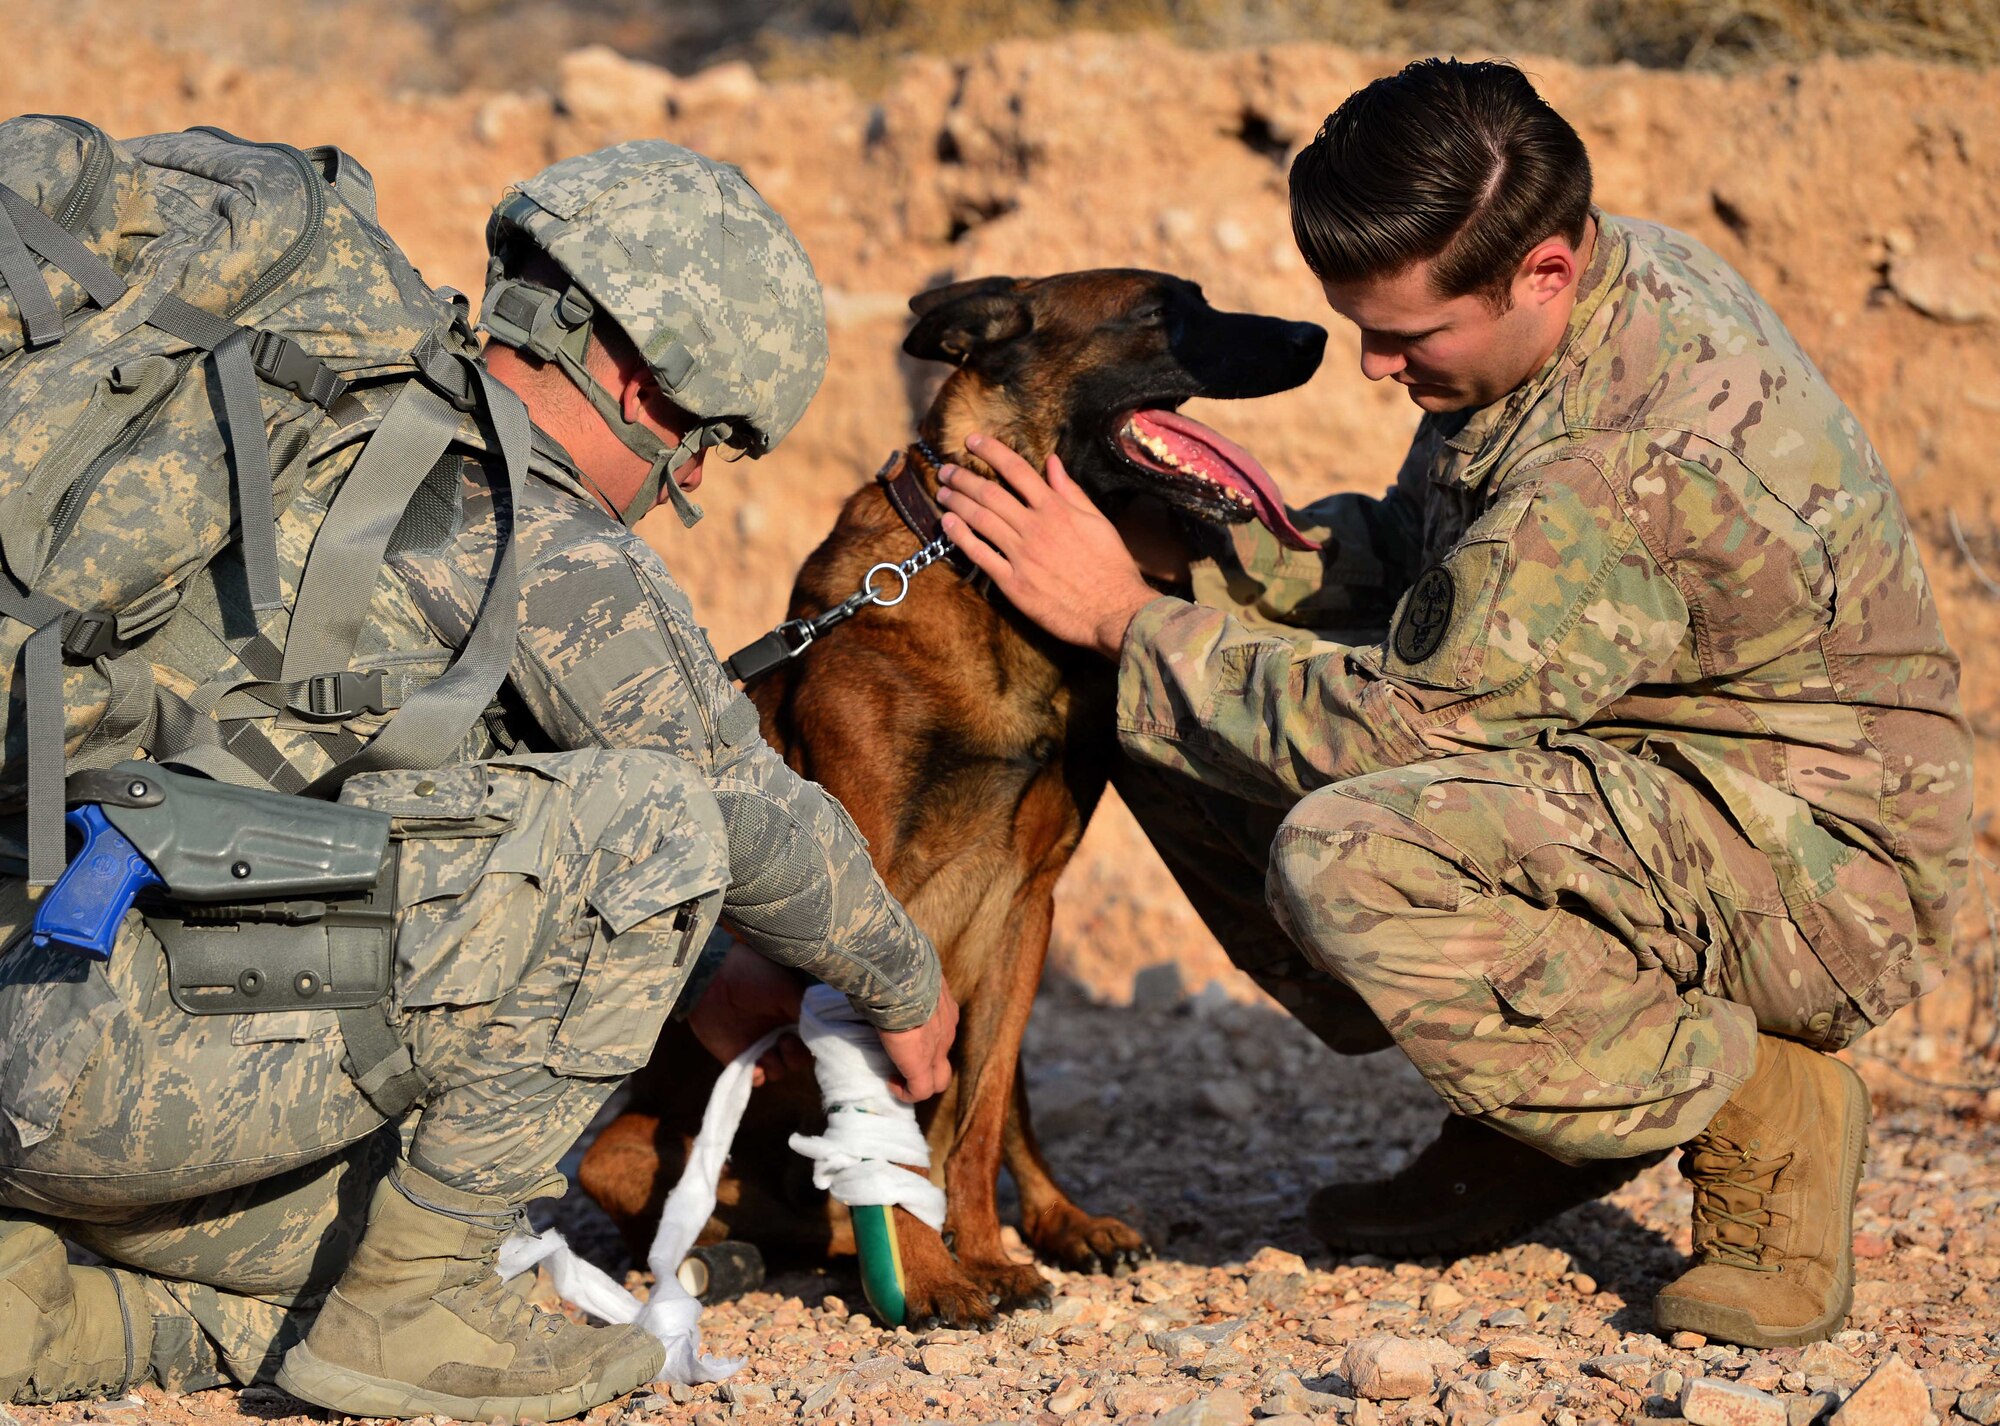 Senior Airman Elijah, 799th Security Forces Squadron military working dog handler (left), and U.S. Army Sgt. Robert Ward, Public Health Activity – Hood, Mojave Branch veterinary technician (right), treat Ssamuel, 799th SFS MWD (center), for a simulated injury during a training exercise Aug. 8, 2018, at Nellis Air Force Base, Nev. Along with various detection responsibilities, handlers must be able to provide medical aid when their MWD suffers from wounds or injuries. (U.S. Air Force Photo by Airman 1st Class Haley Stevens)